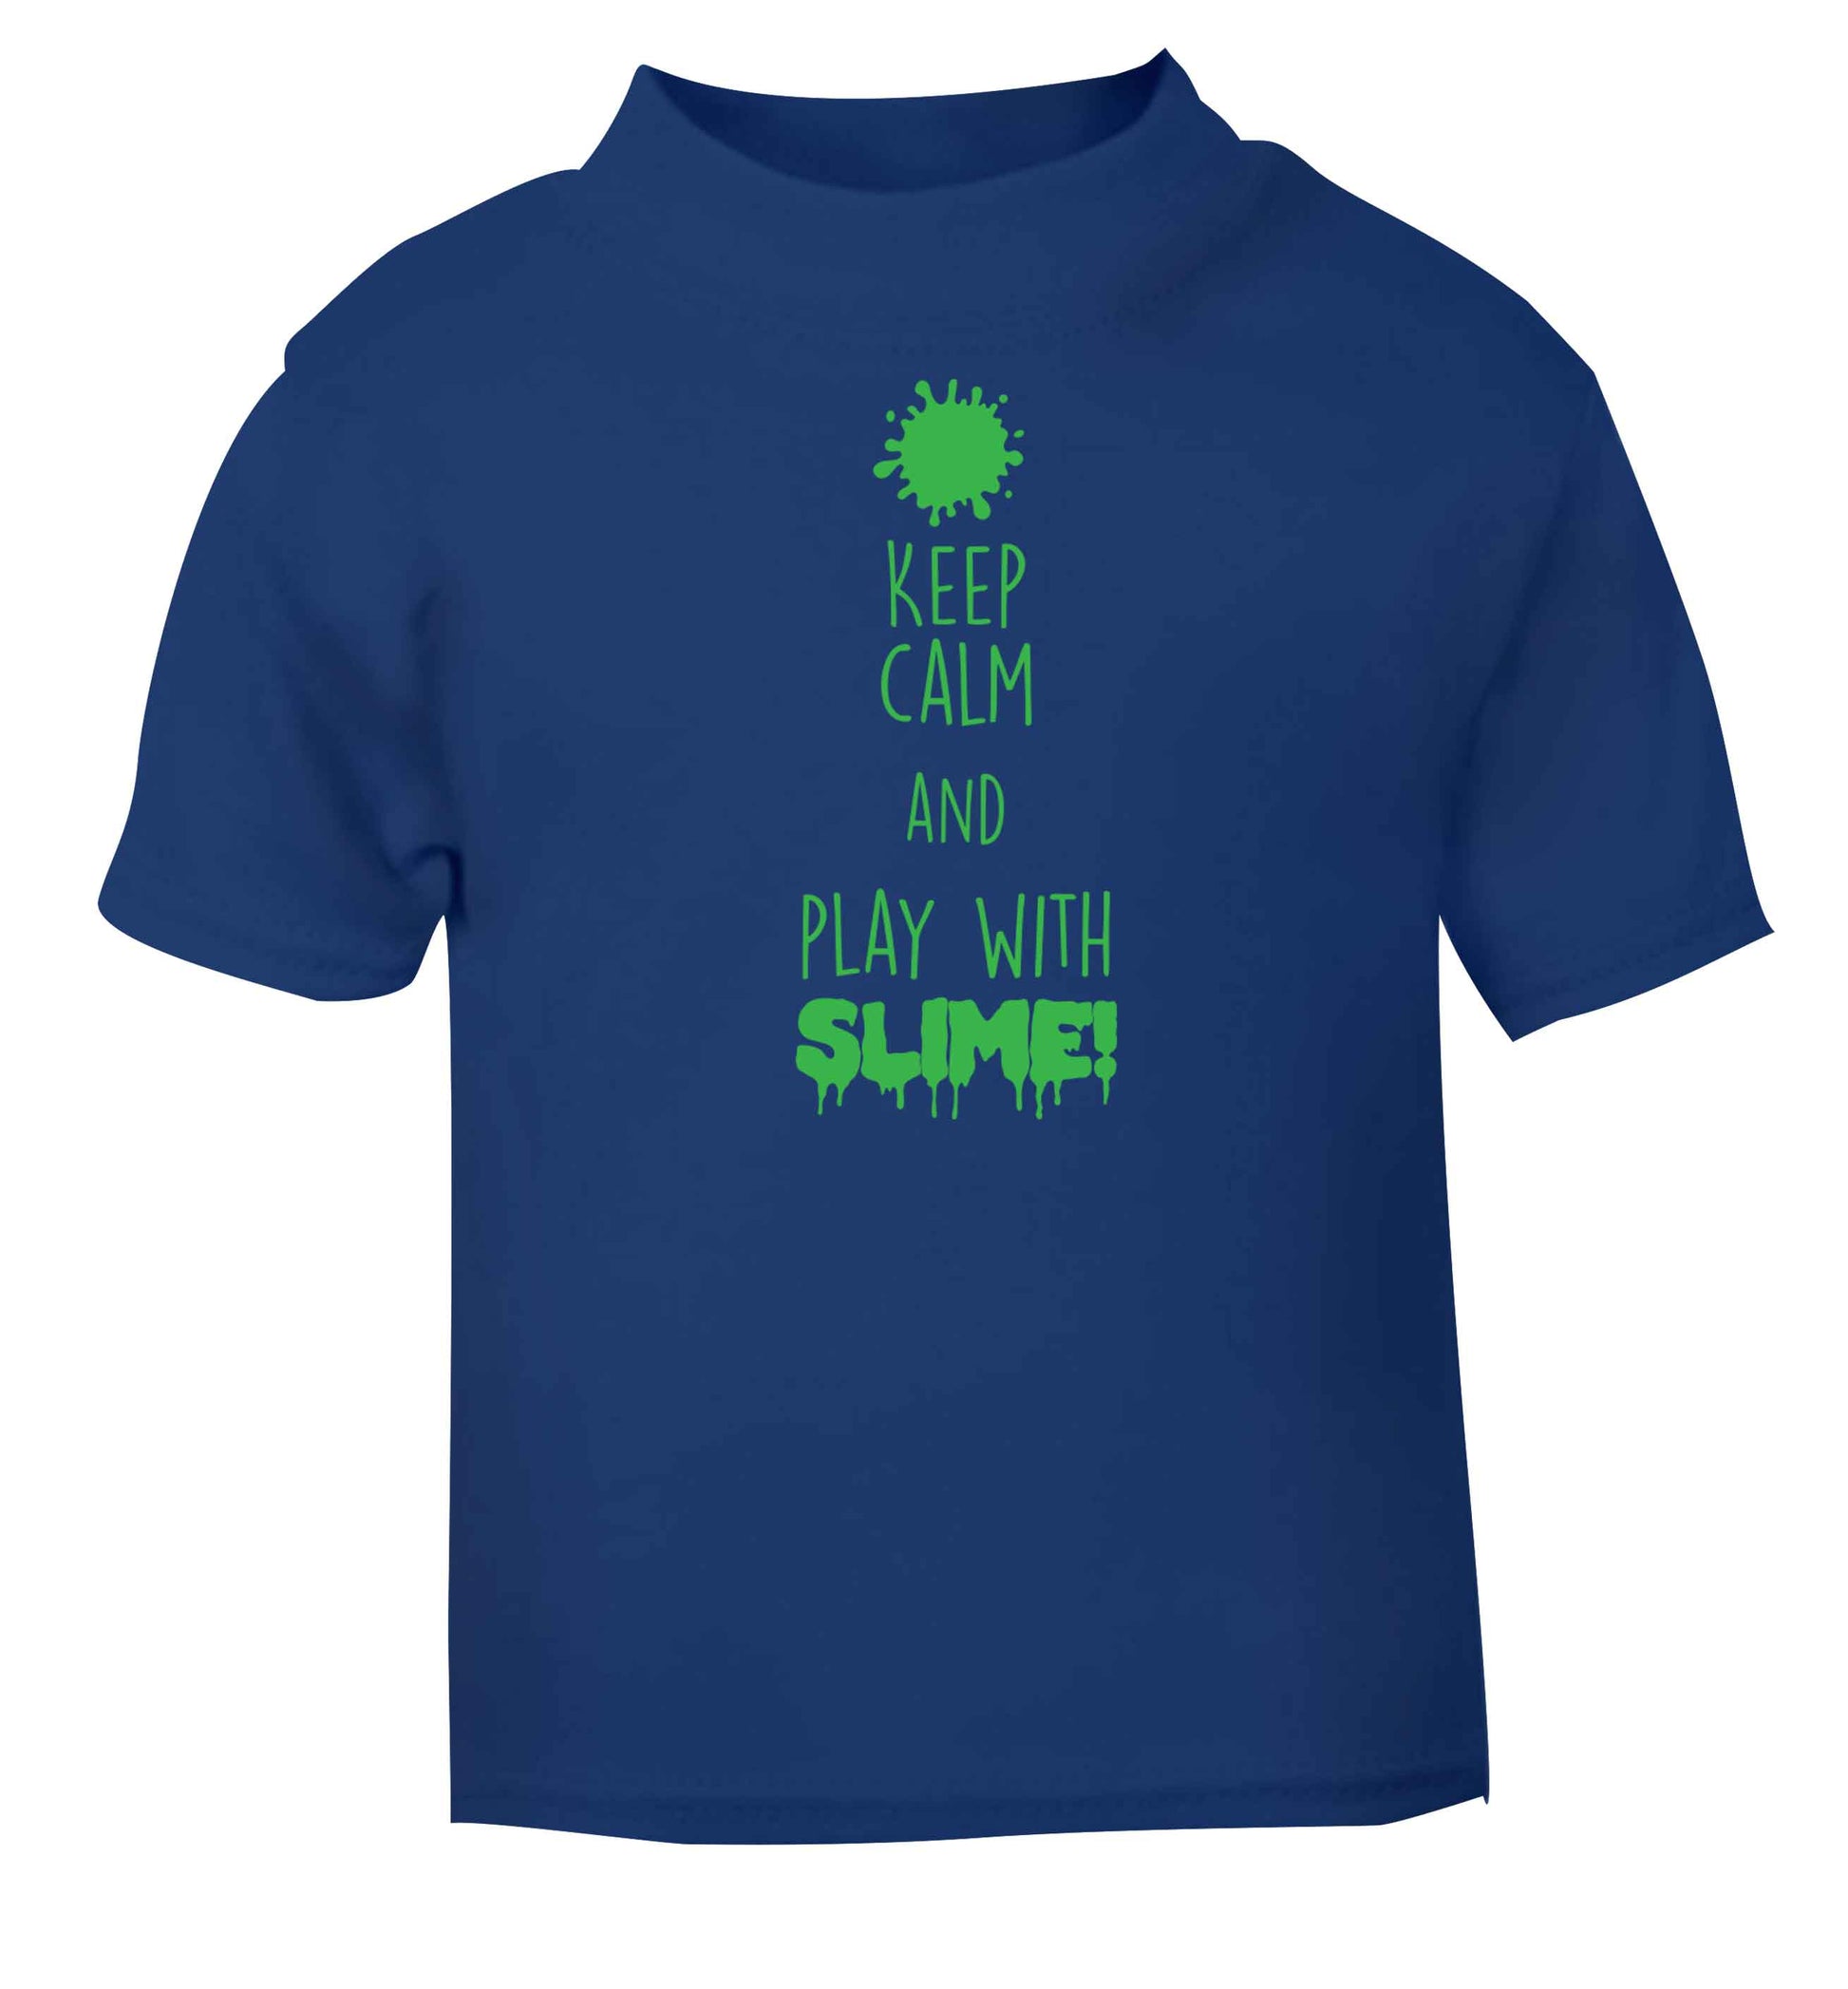 Neon green keep calm and play with slime!blue baby toddler Tshirt 2 Years